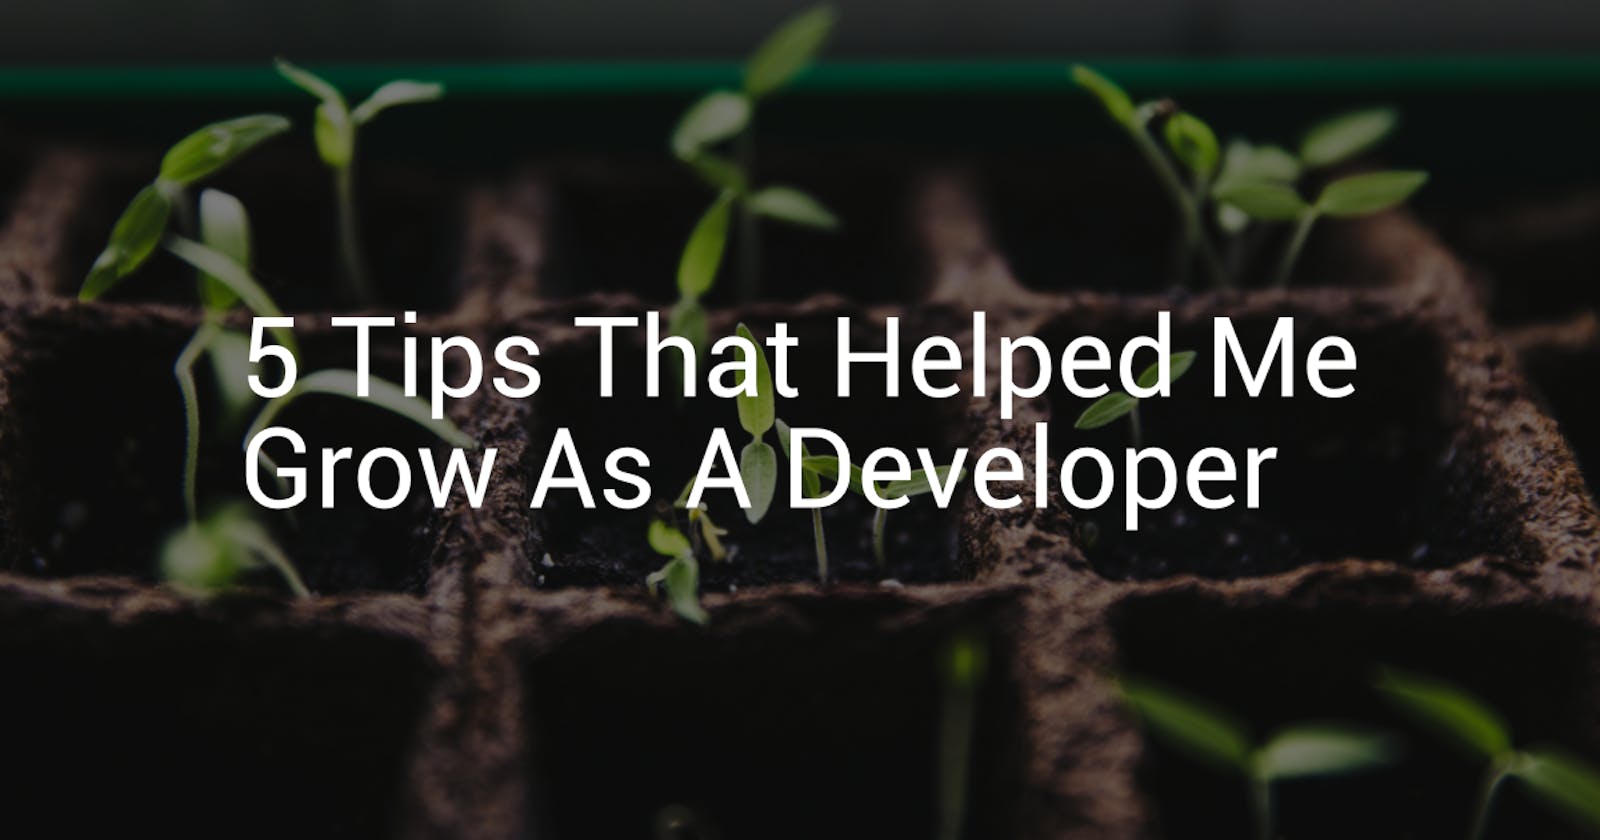 5 Tips That Helped Me Grow As A Developer